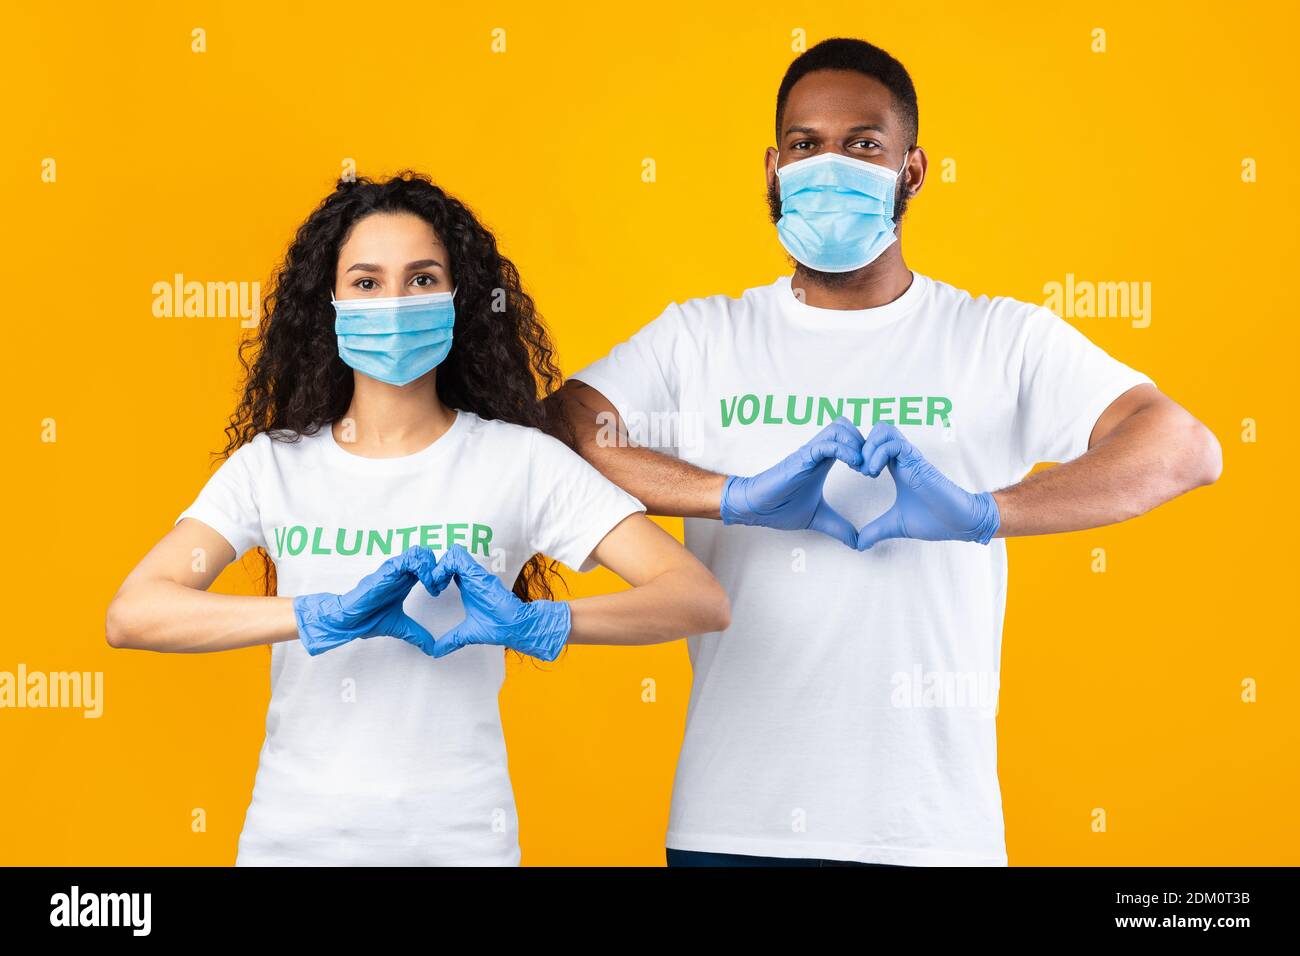 Two Volunteers Gesturing Heart-Shape Wearing Masks And Gloves, Yellow Background Stock Photo